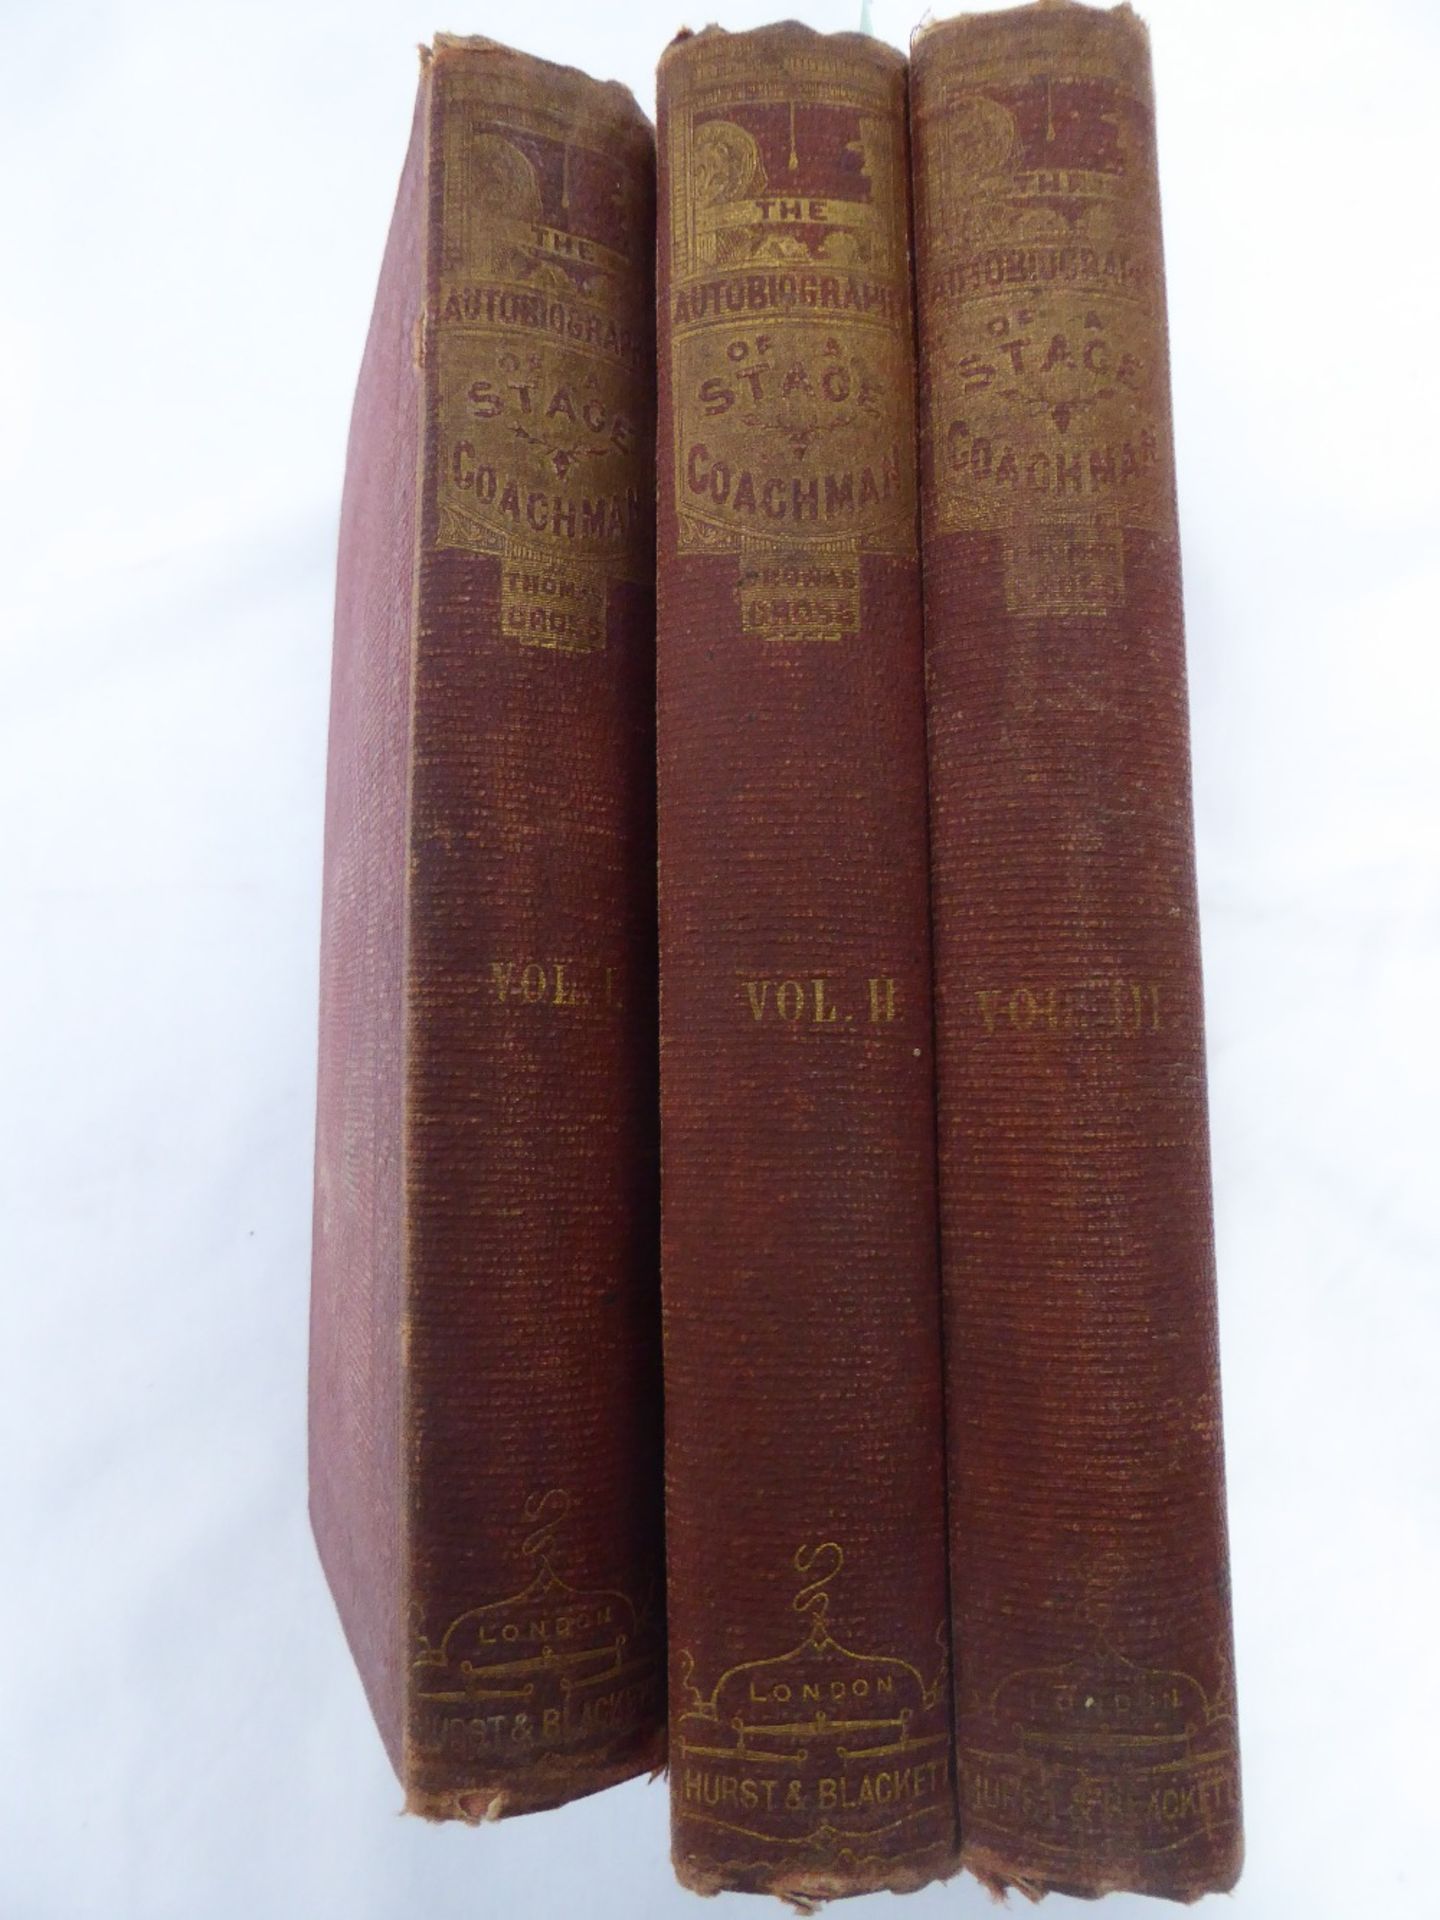 The Autobiography of a Stage-Coachman by Thomas Cross, published 1861, in 3 volumes